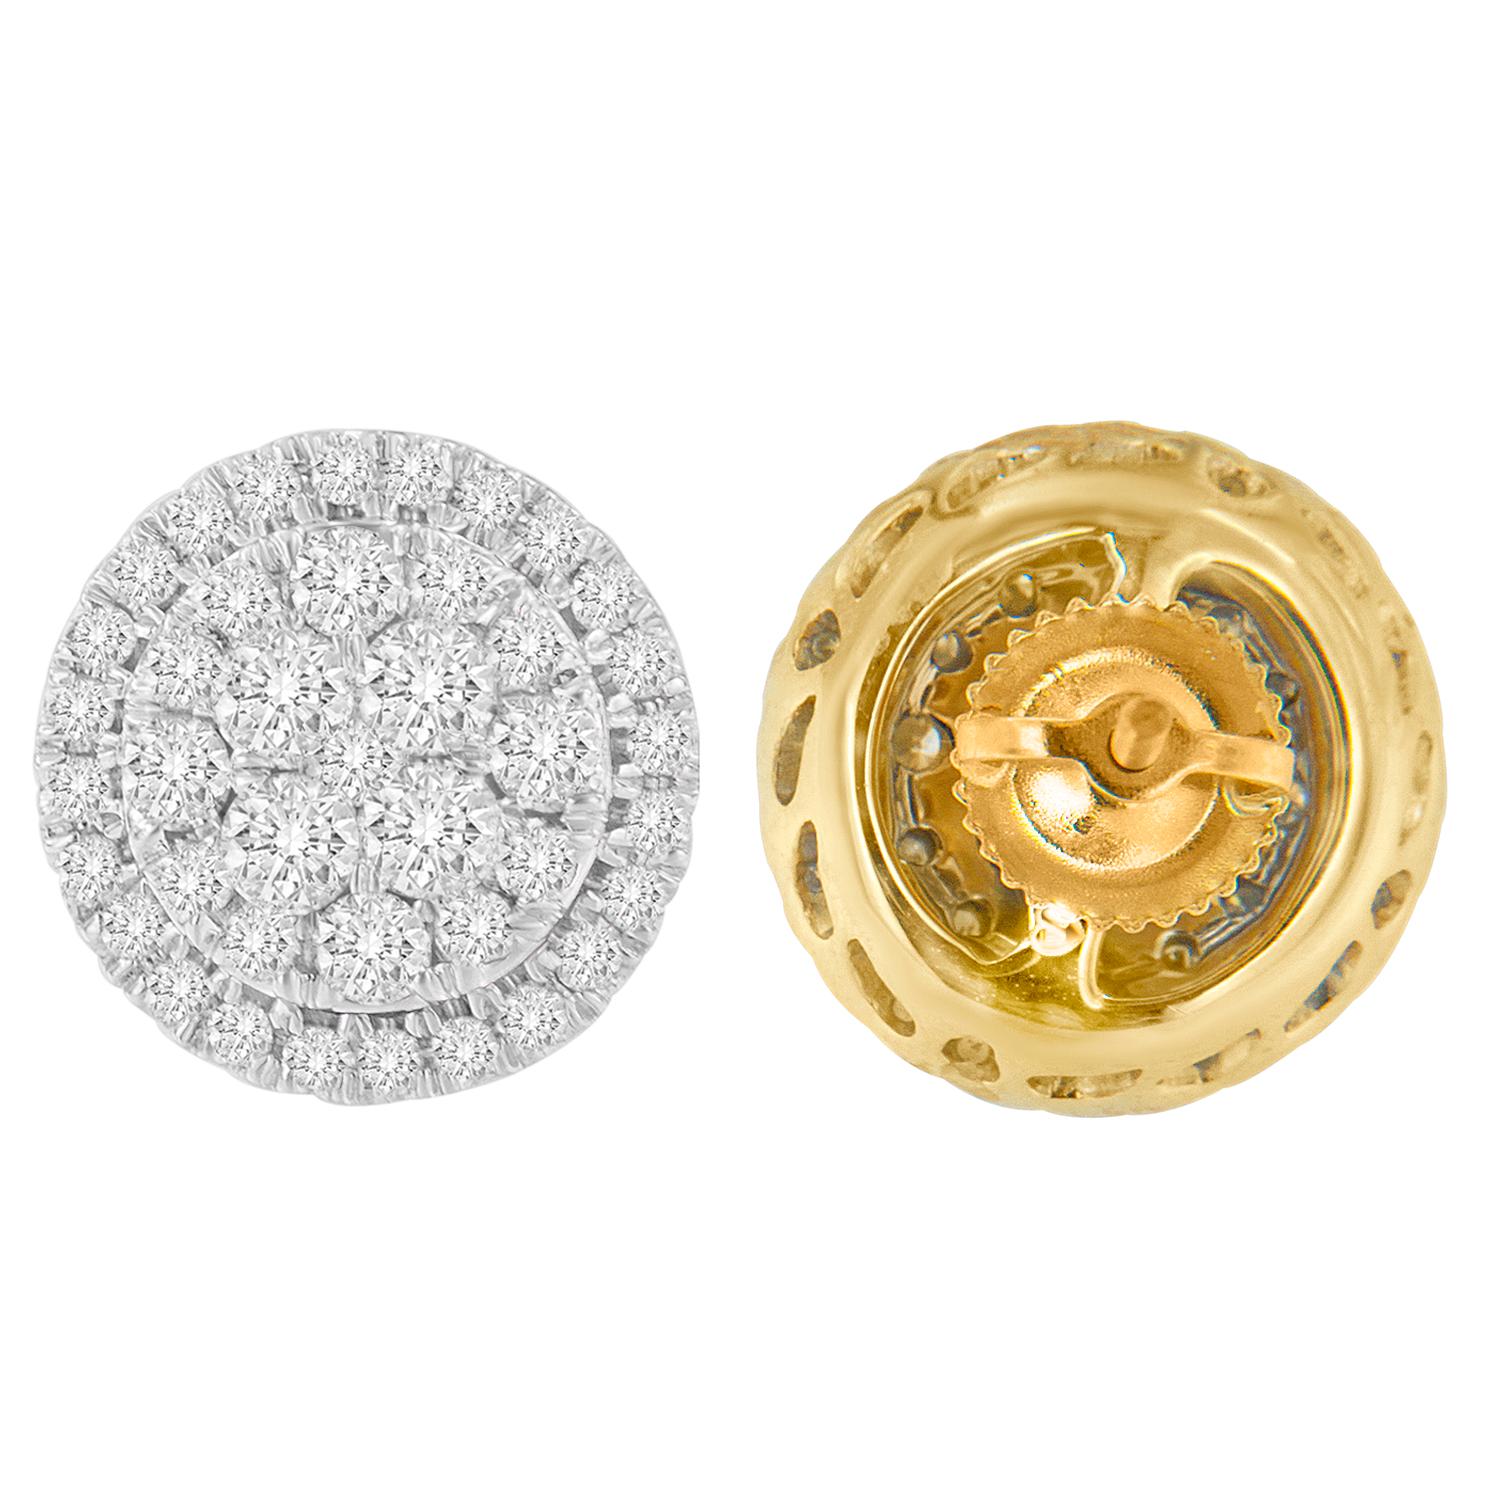 Modern 10K Yellow Gold 1 1/2 Carat Composite Floral Diamond Halo Stud Earrings For Sale